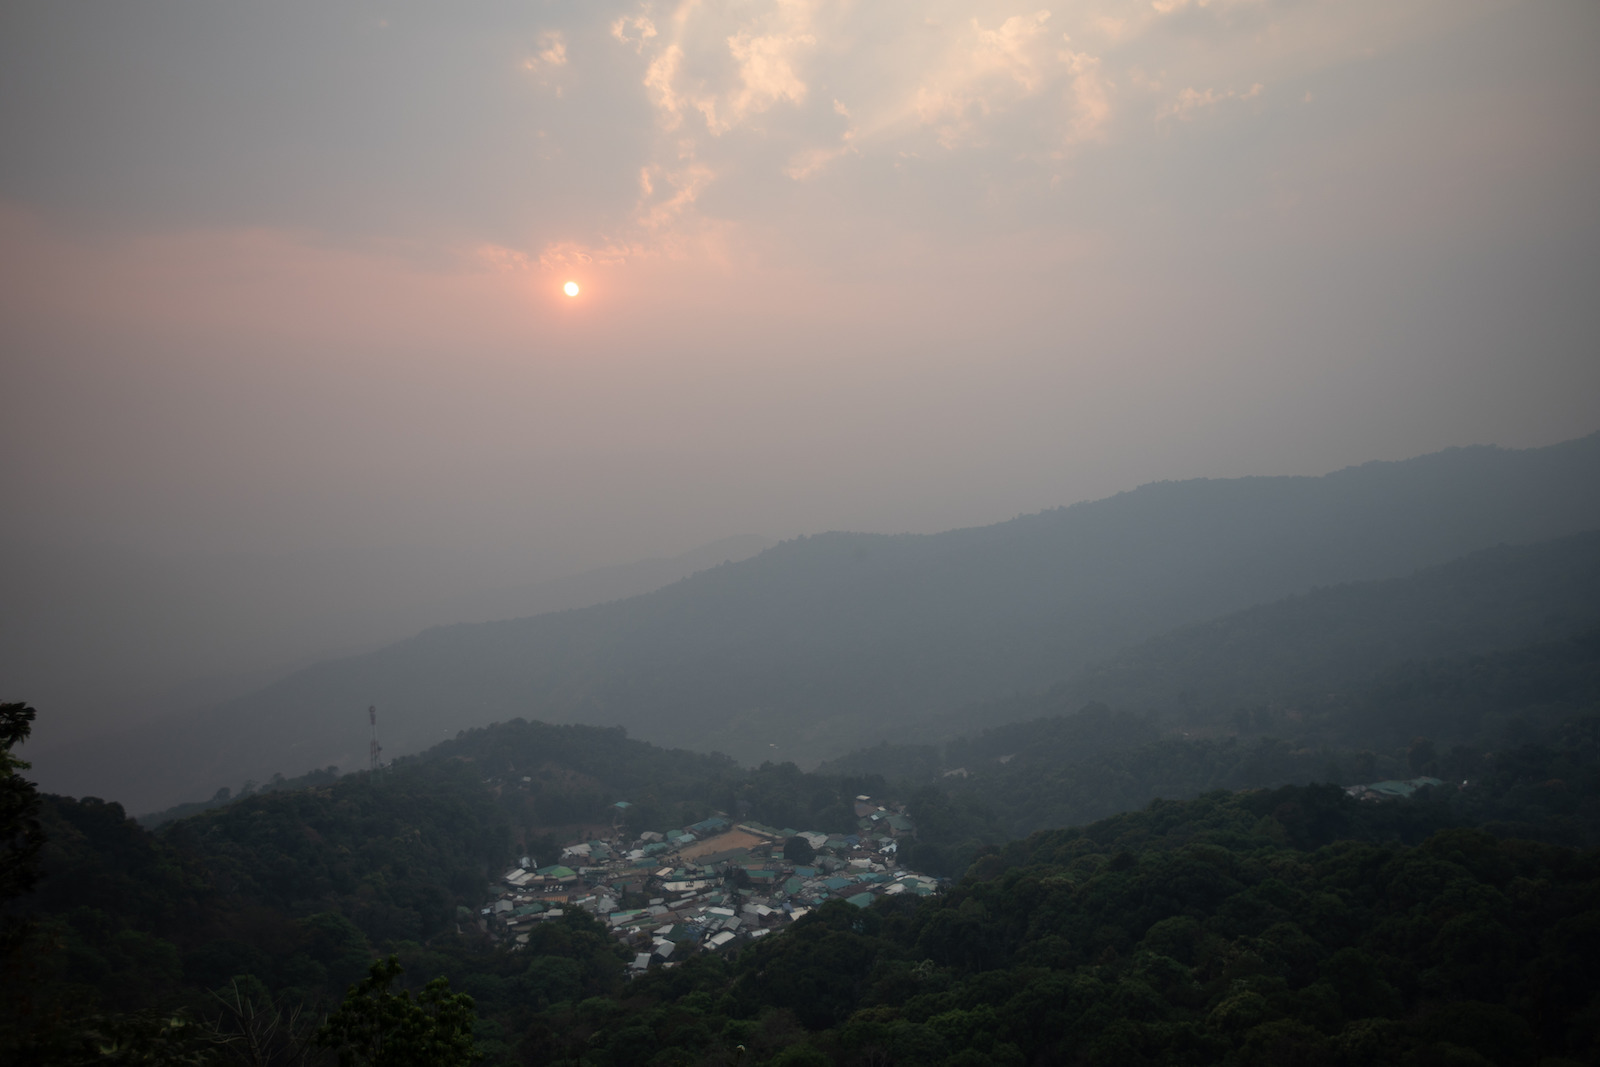 the sun is barely visible through a thick cloud of smoke over a mountain village